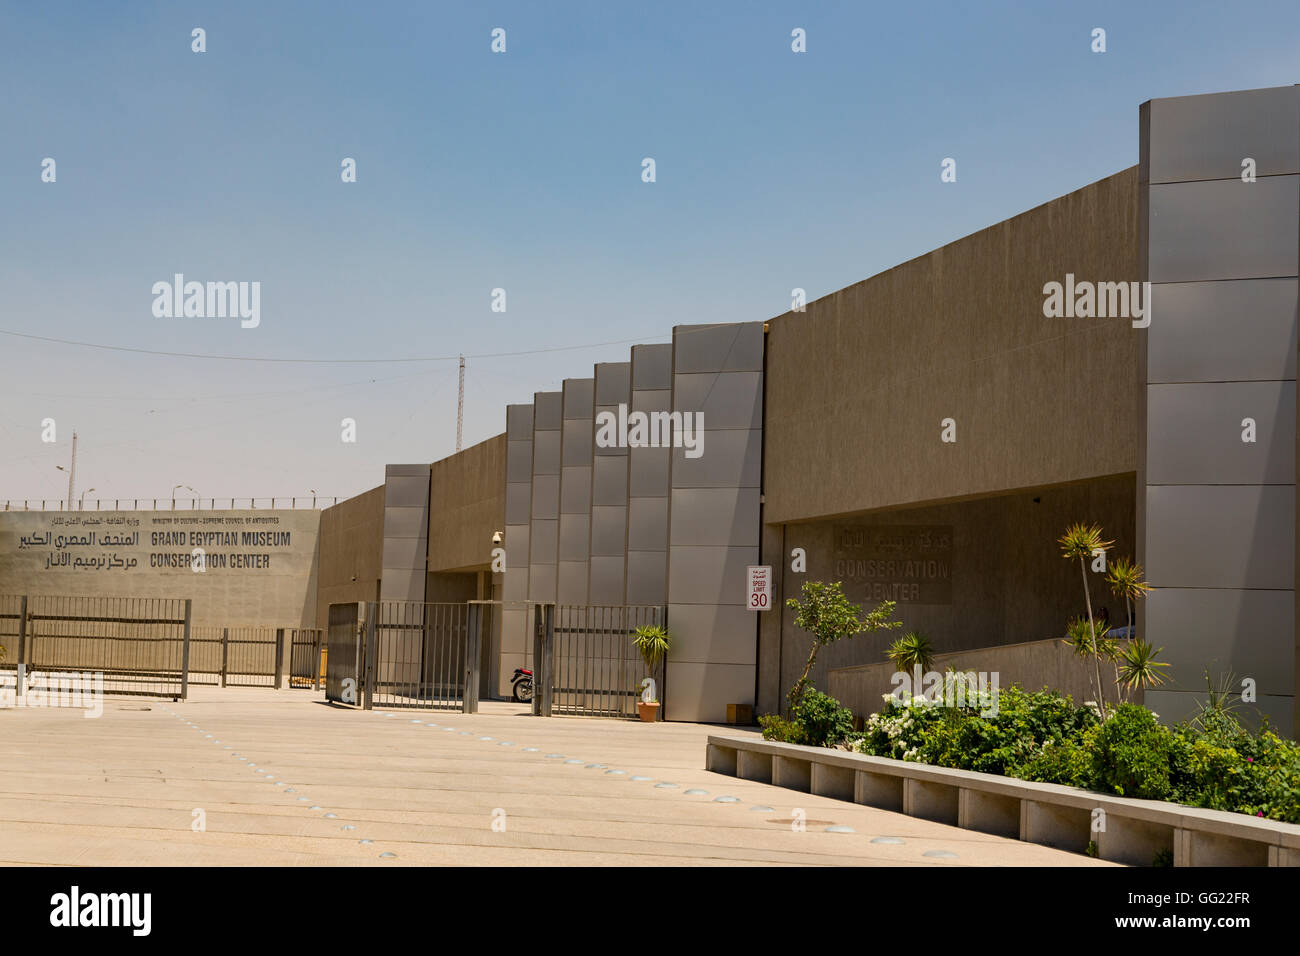 Egypt, Cairo, Giza, the Conservation Center of the Grand Egyptian Museum (GEM). Stock Photo